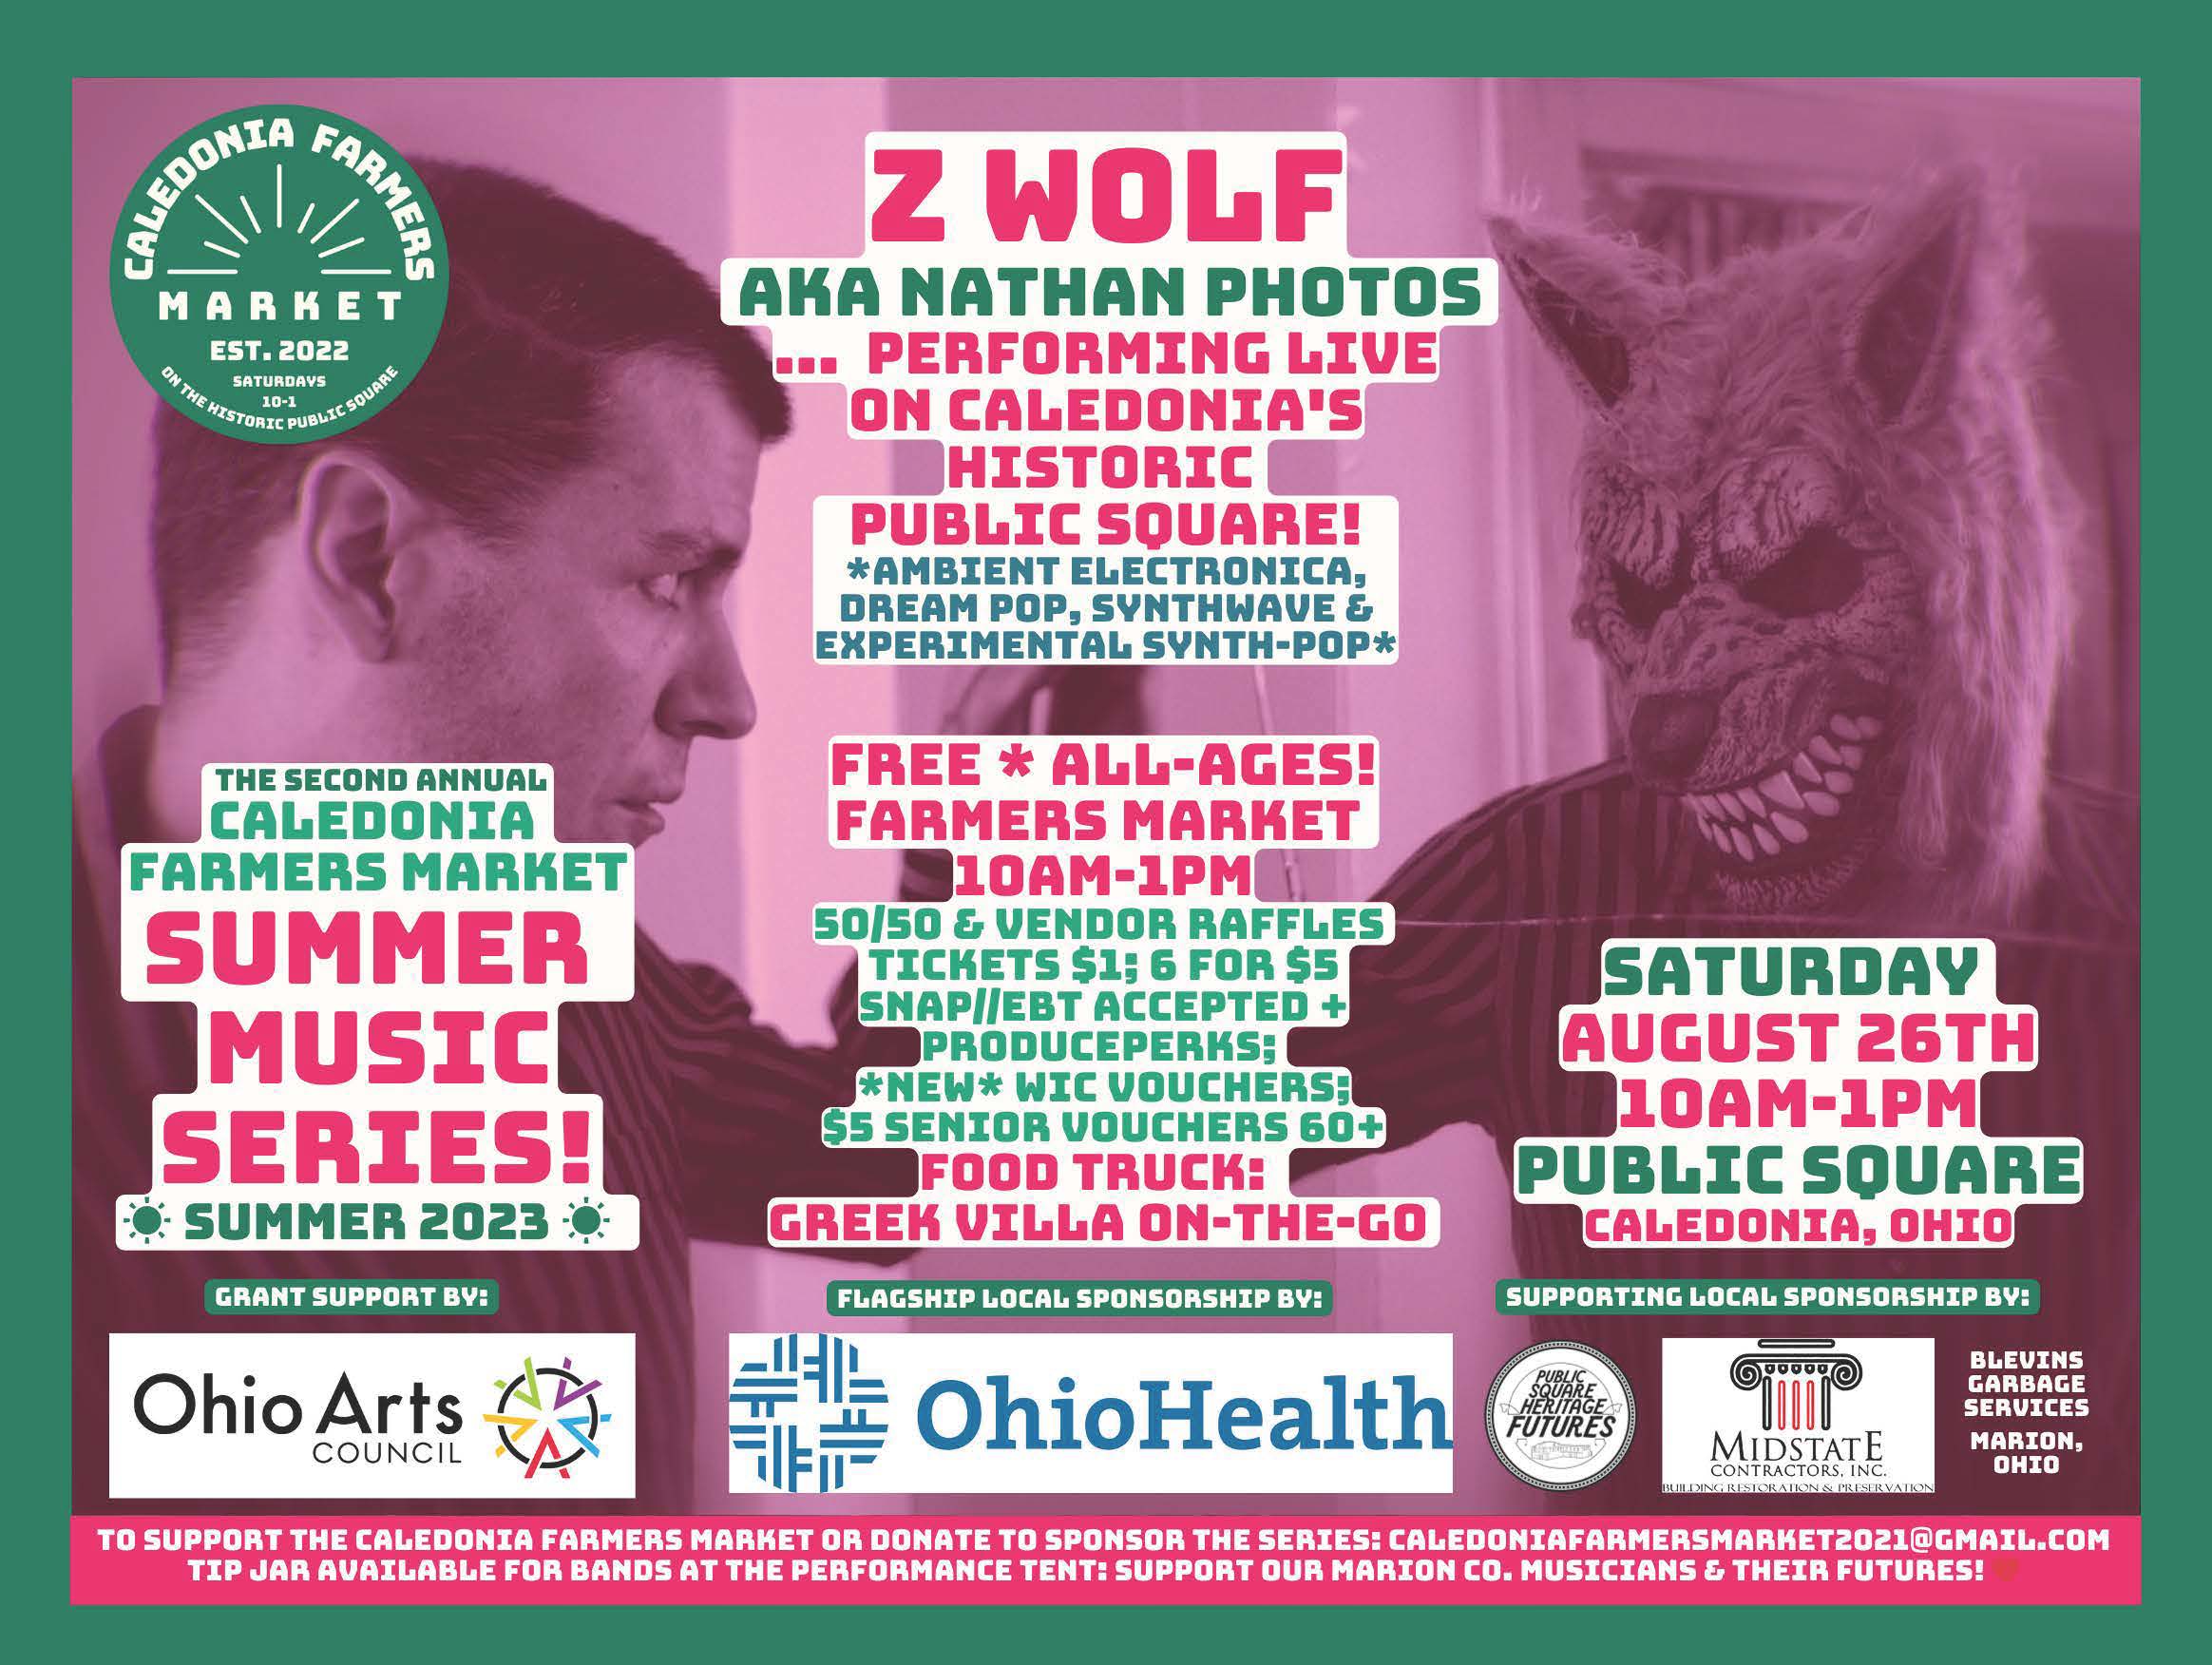 Z Wolfe images with event descriptions and sponsors listed